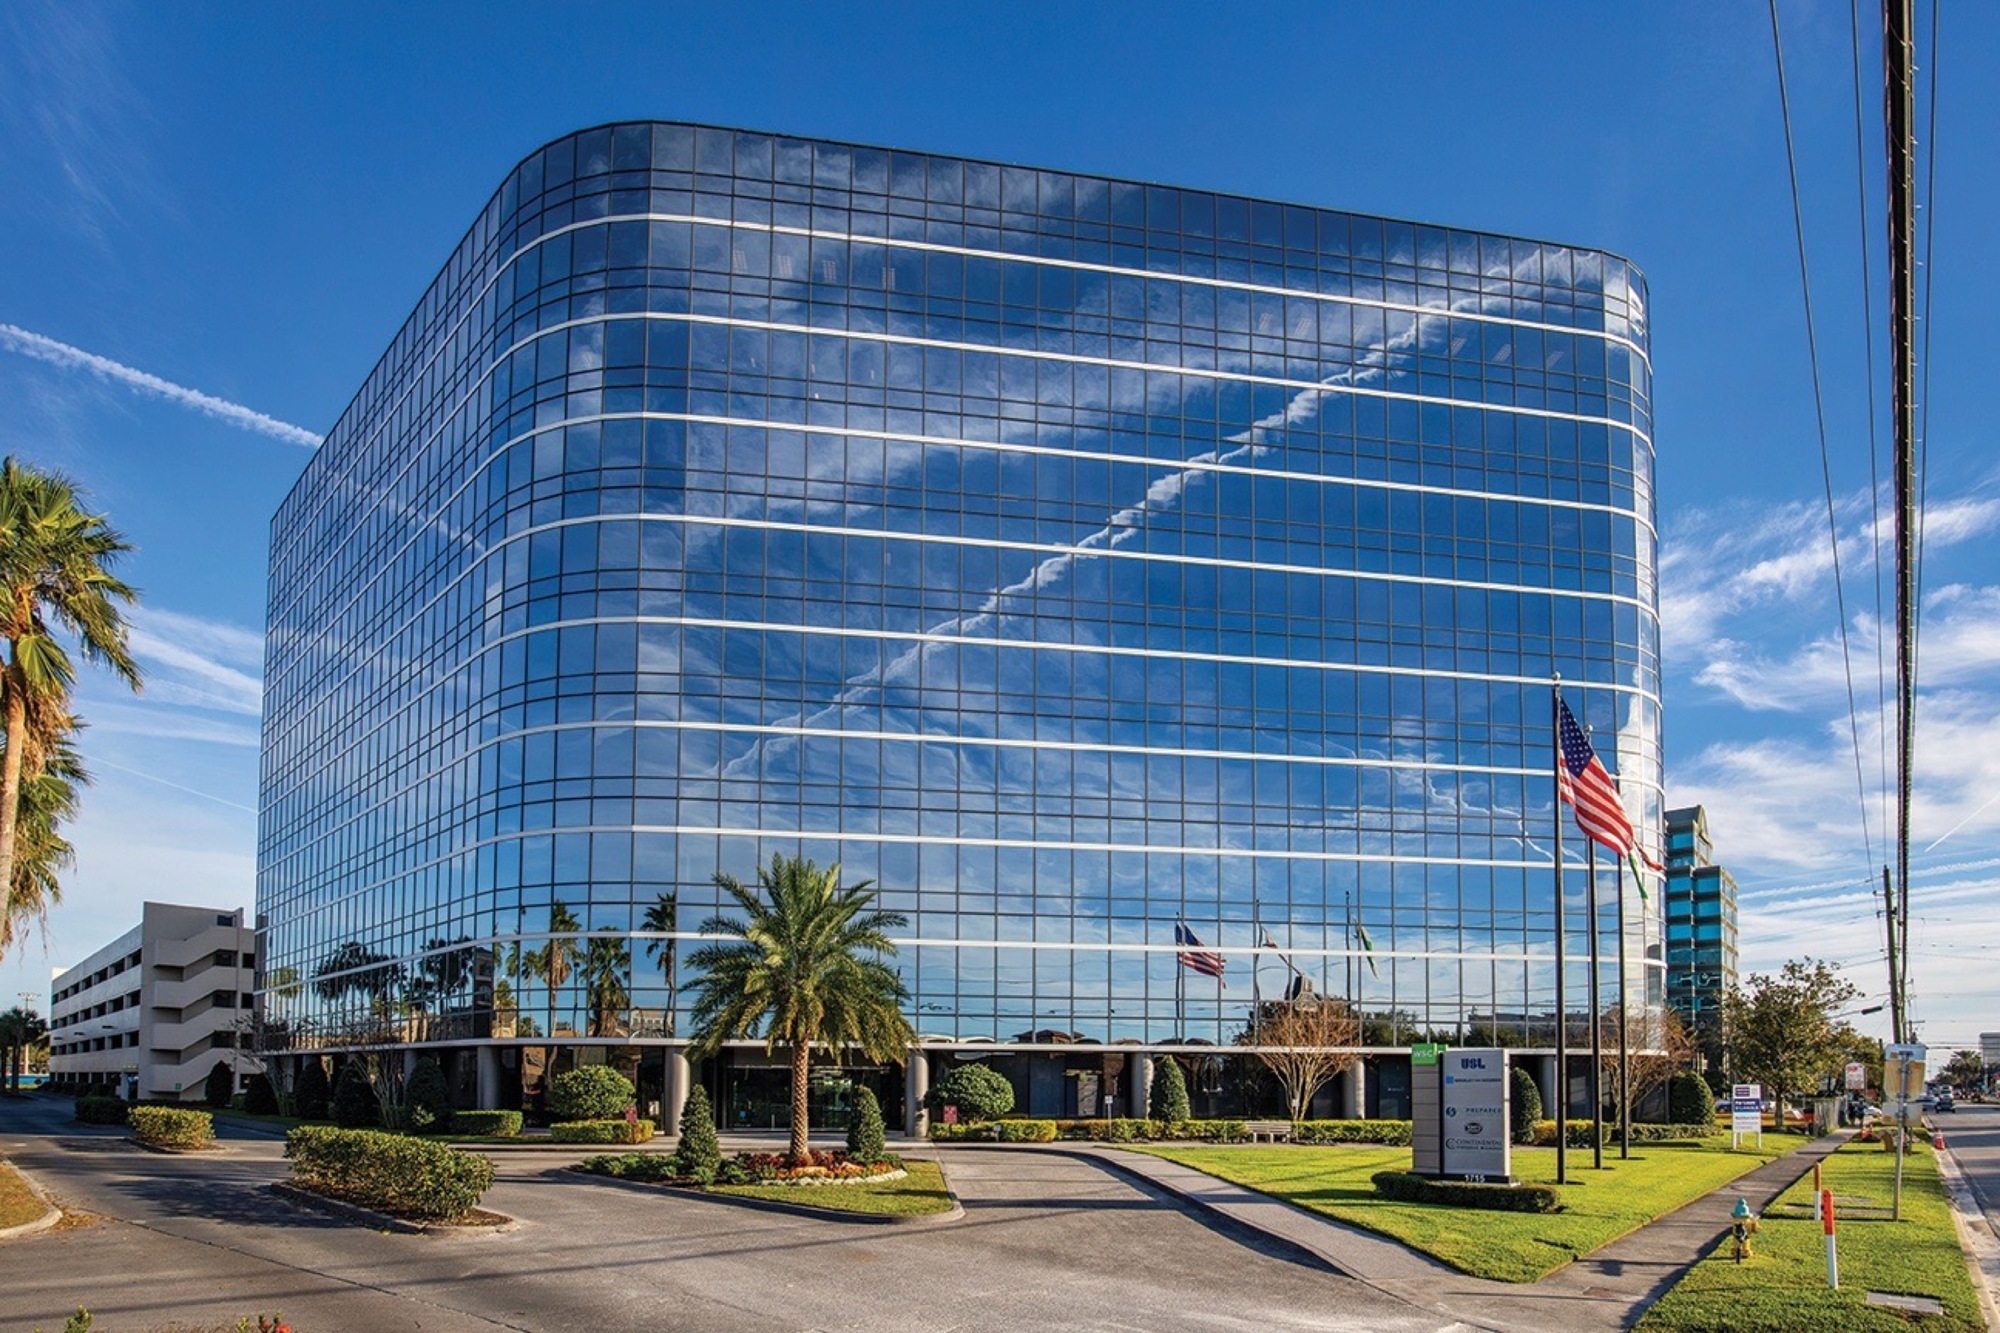 COURTESY PHOTO — The 10-story Westshore Center building is one of several recent office transactions in the Westshore business district.